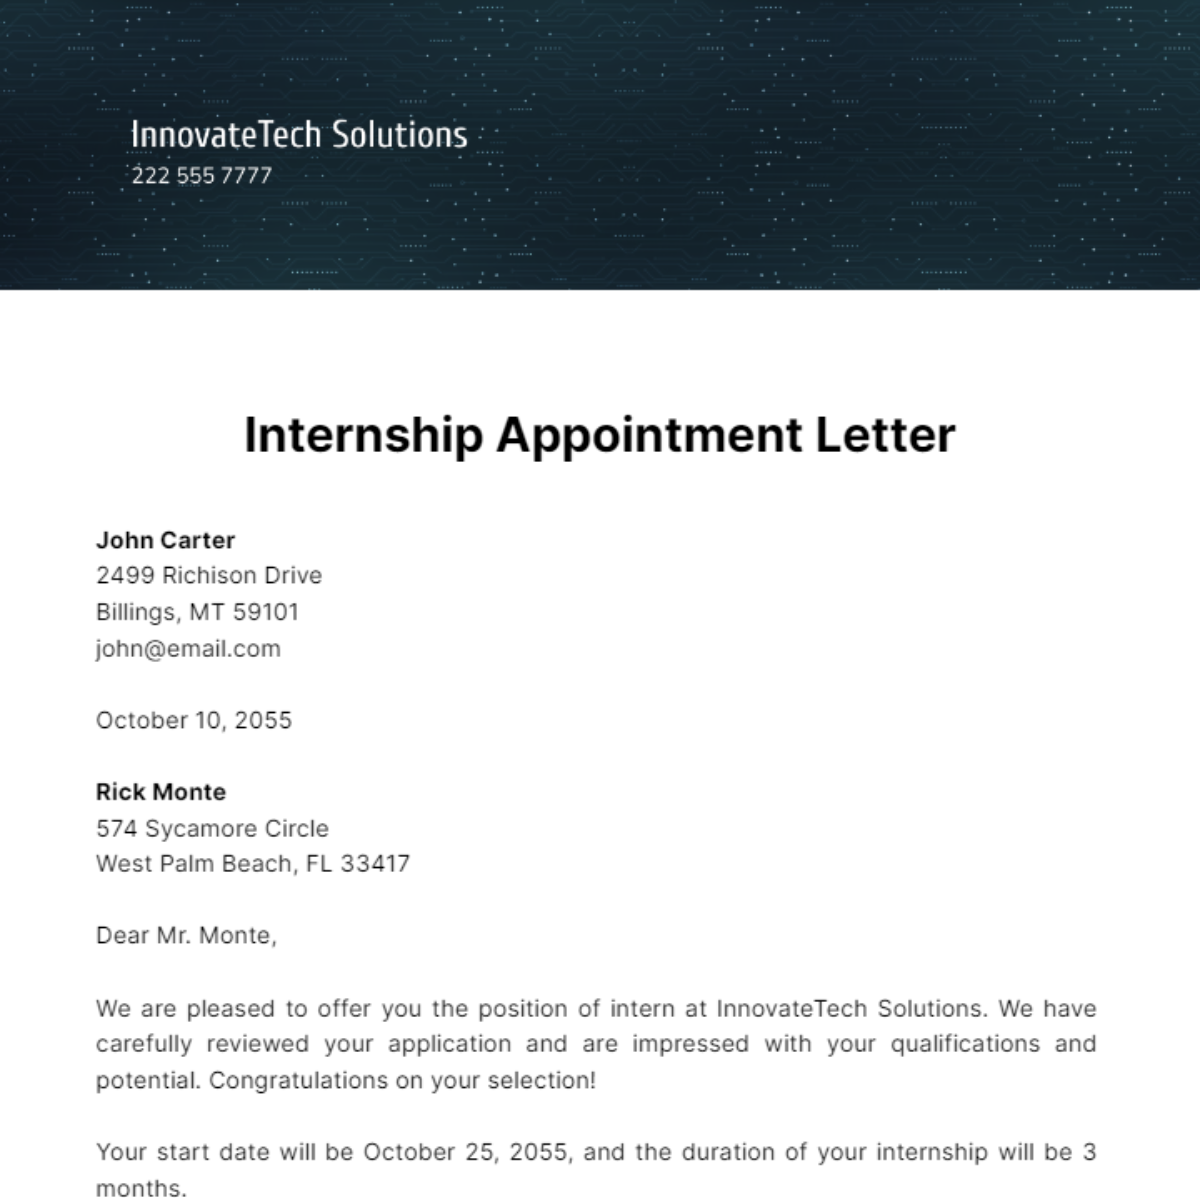 Internship Appointment Letter Template